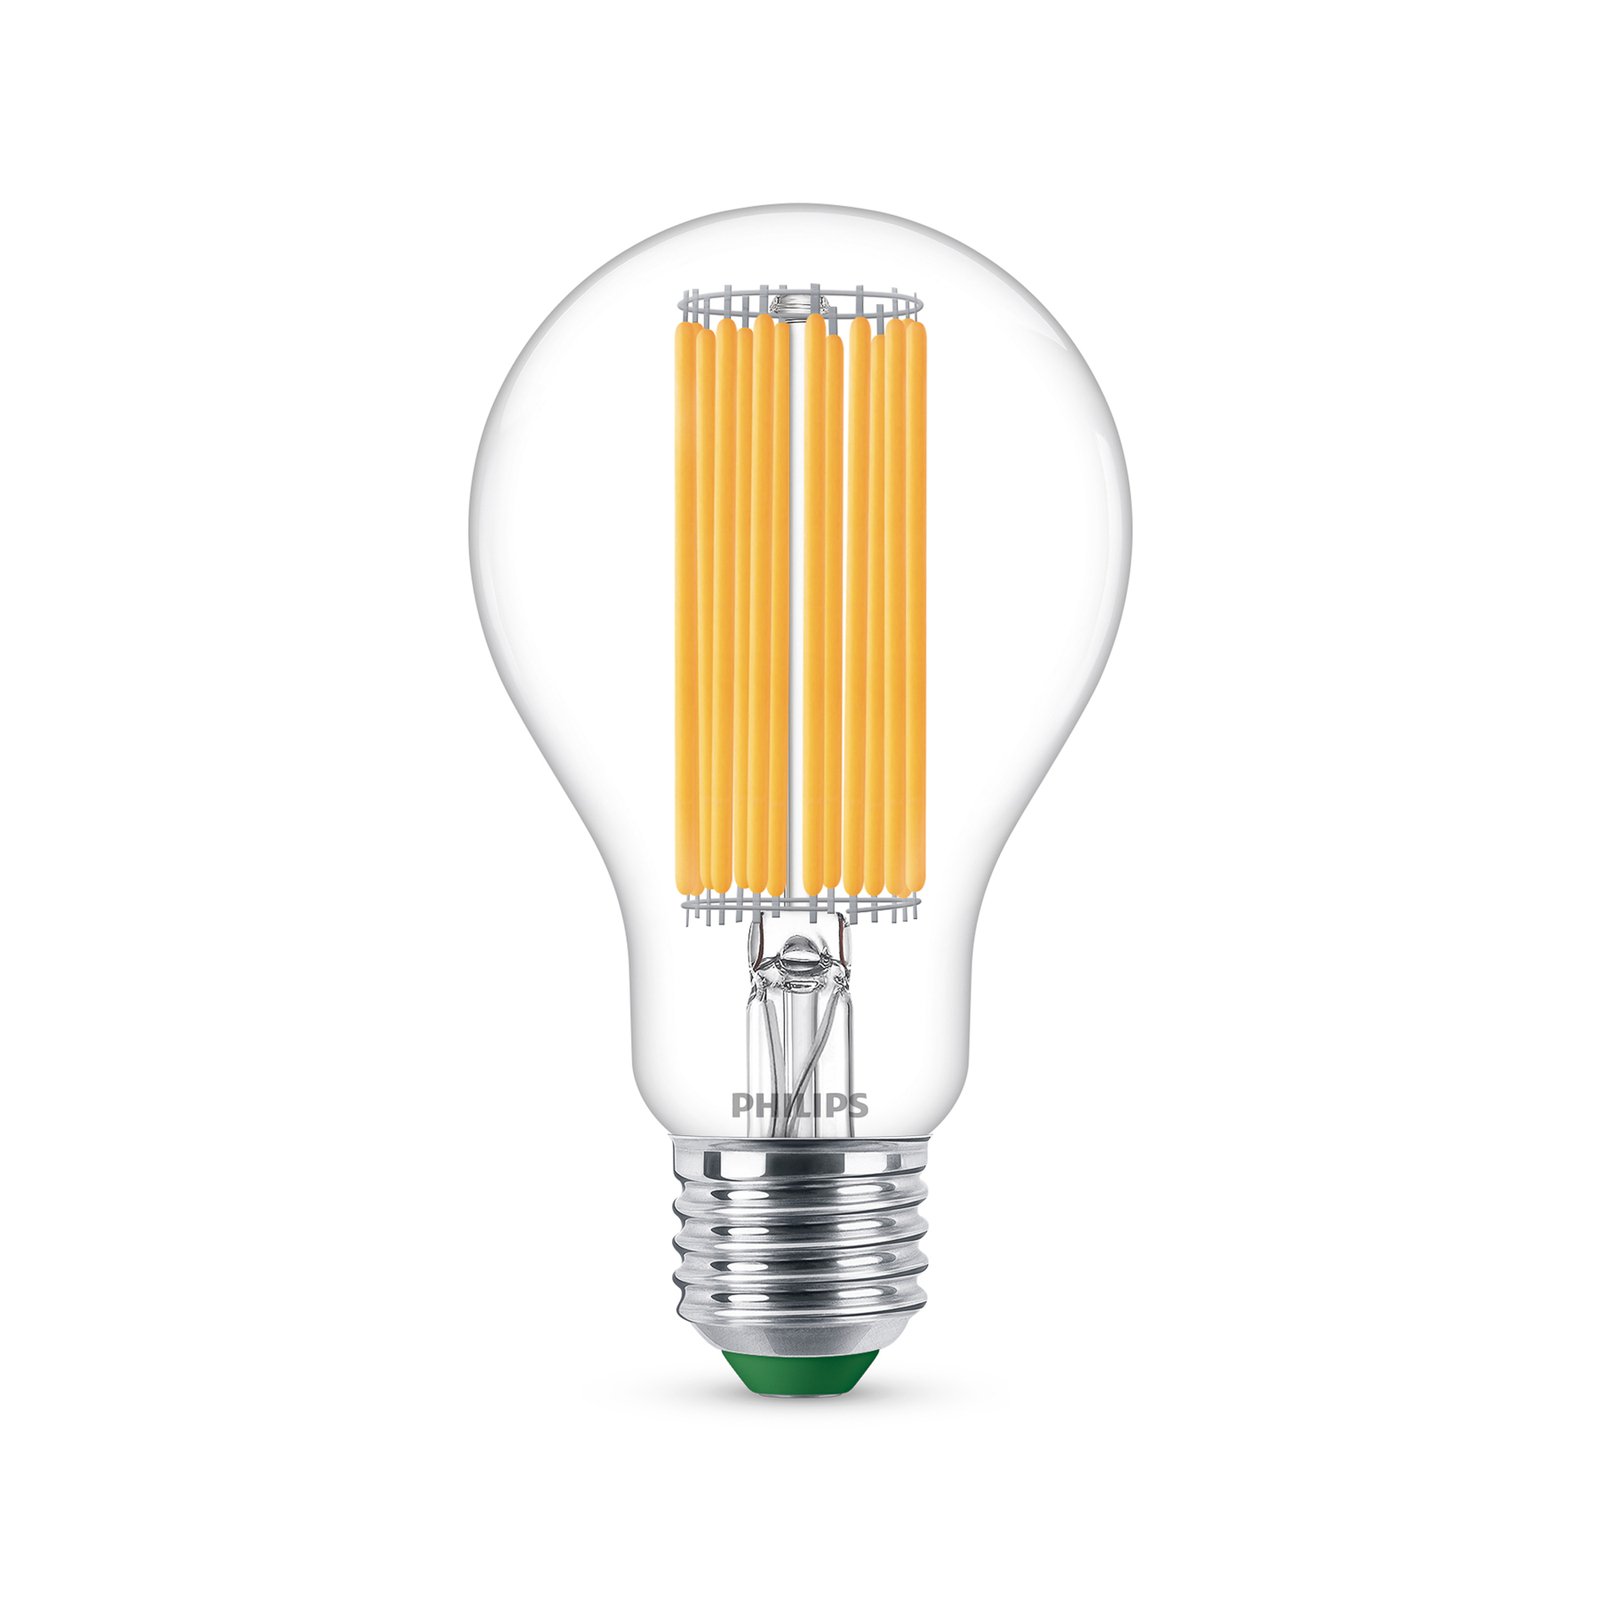 Philips LED E27 A70 7,3 W 1 535 lm claire 3 000 K